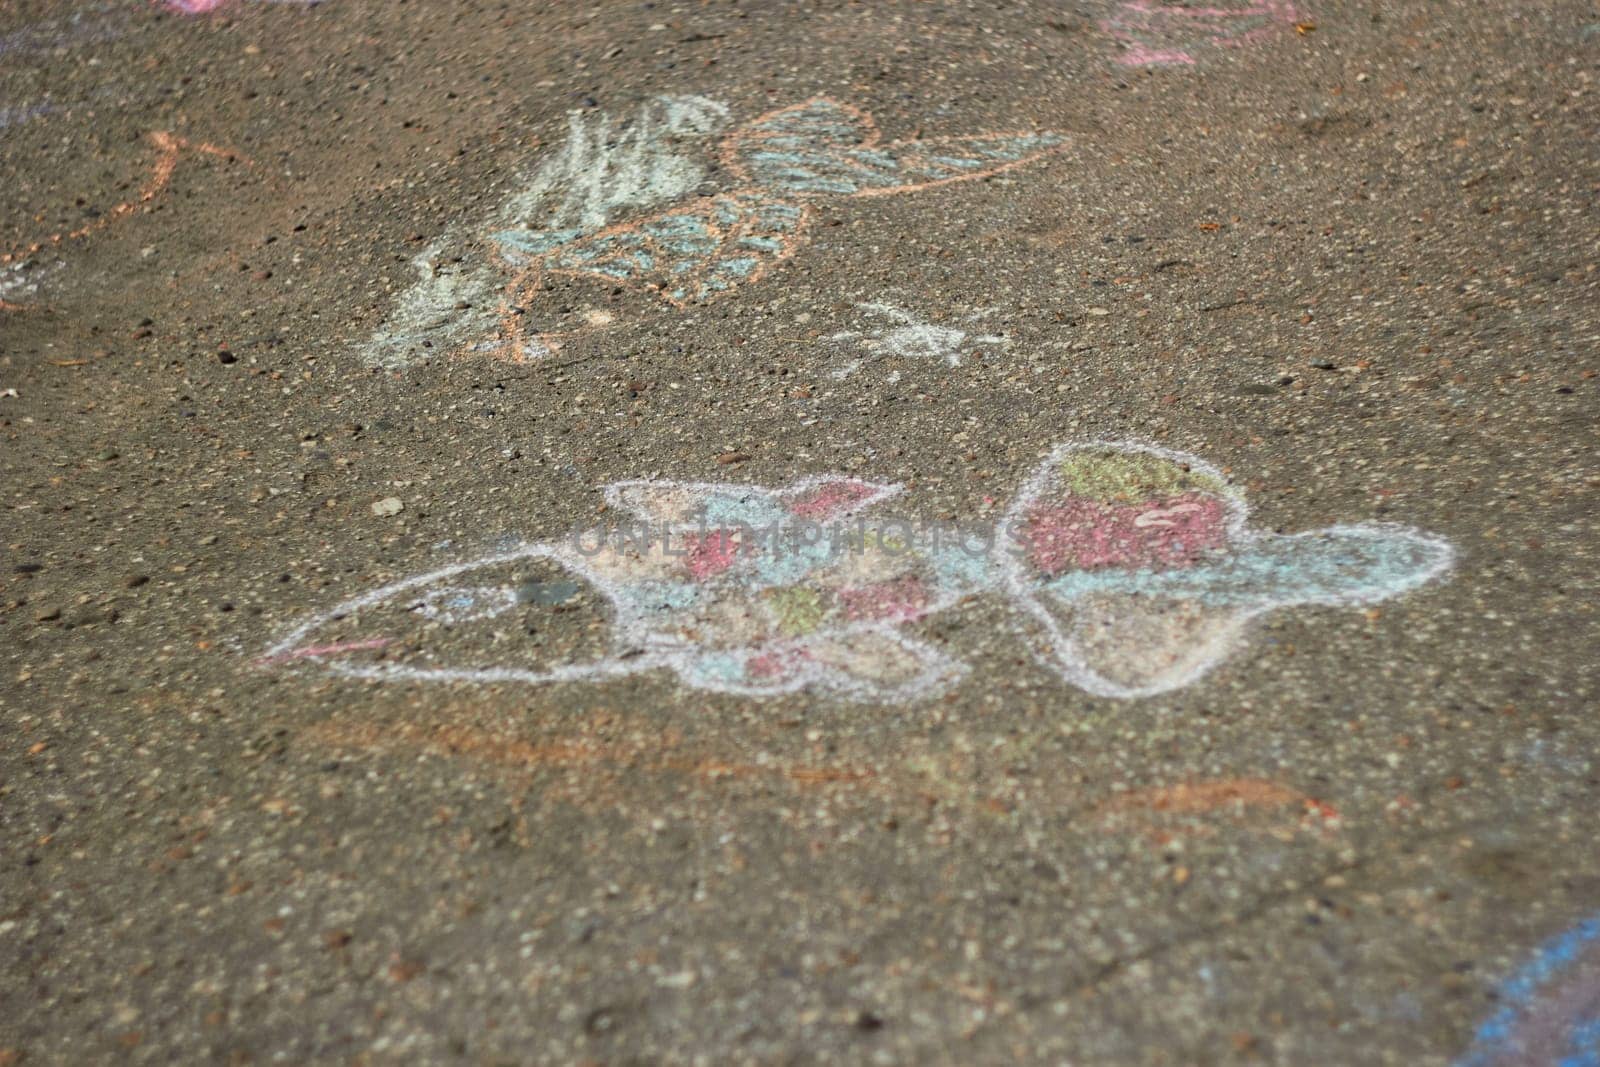 Photograph of children drawing with chalk on pavement. fish. Children entertainment. soft focus.